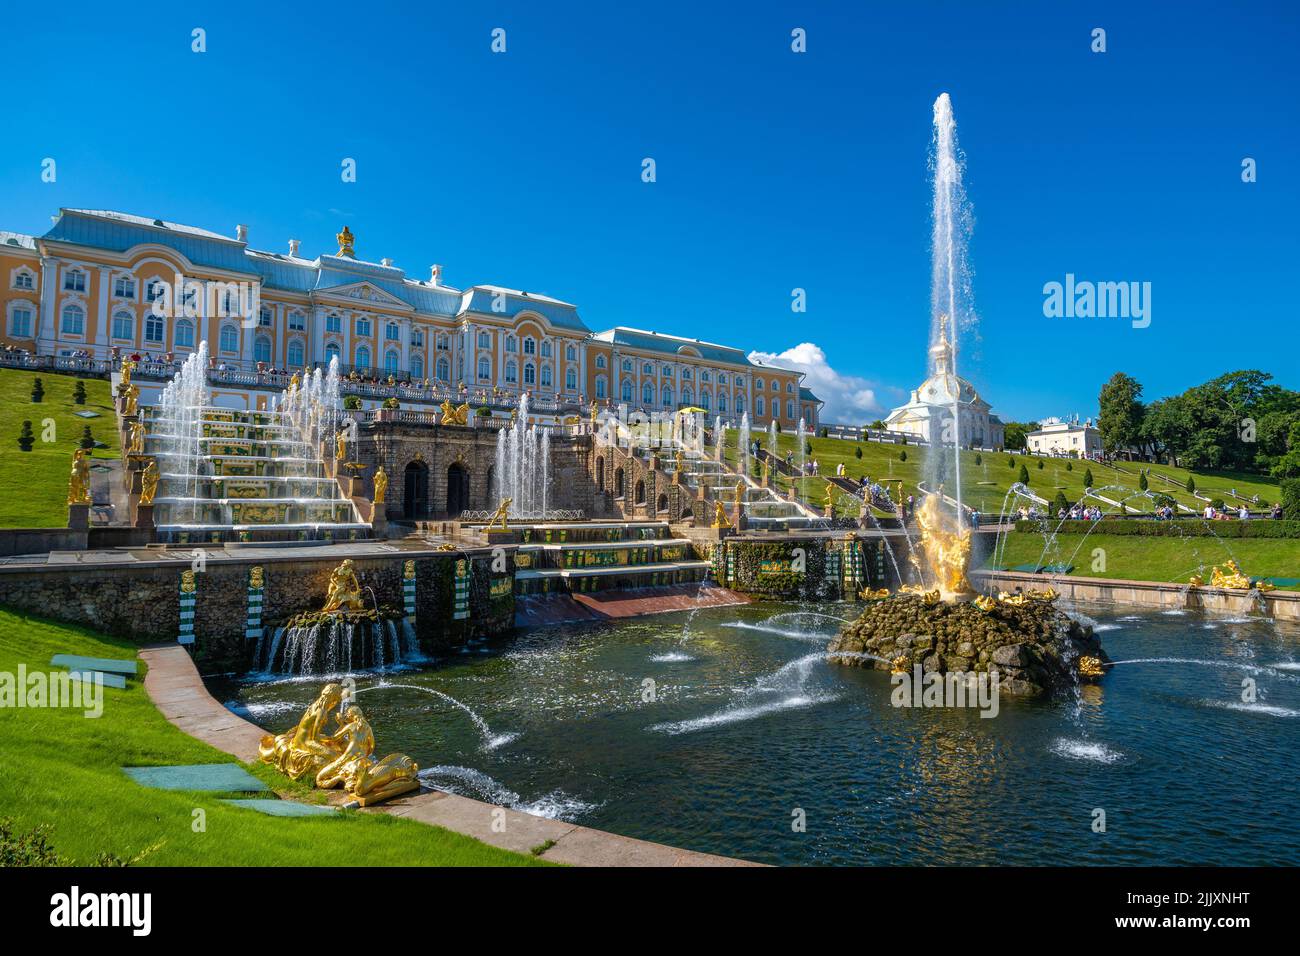 Saint Petersburg, Russia - August 8, 2020: Grand cascade fountains in Petergof, one of the largest fountain structures in the world. Stock Photo